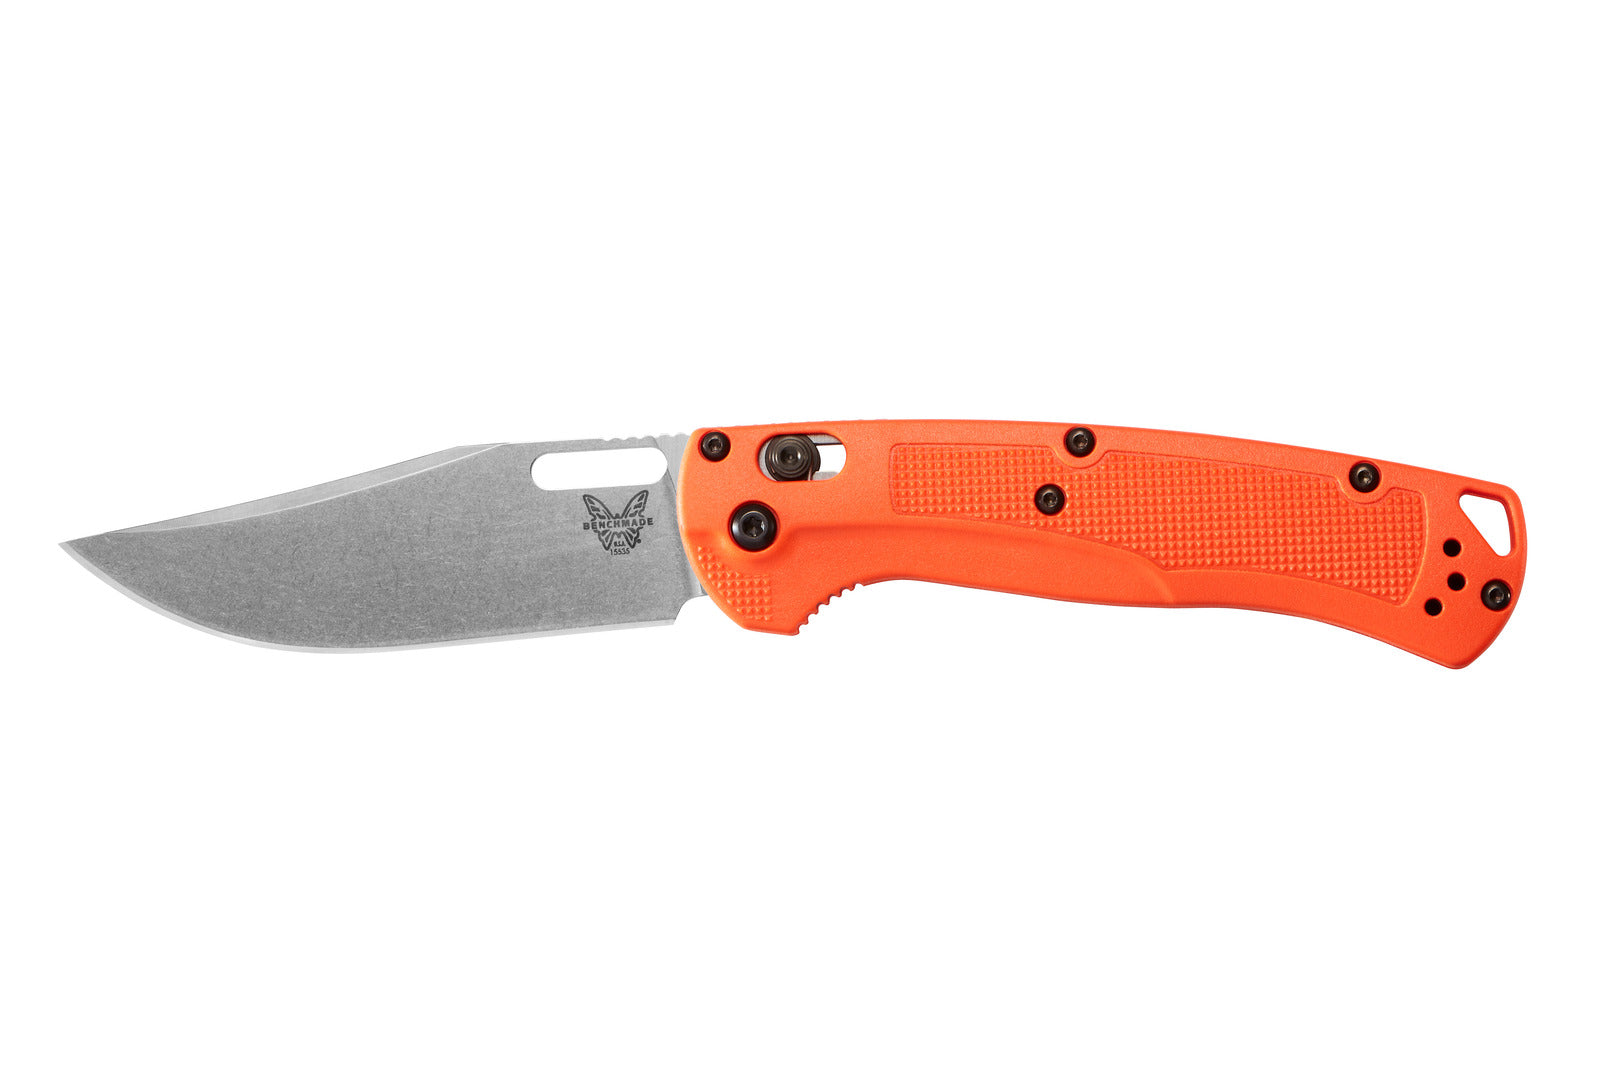 Benchmade 15535 Taggedout Axis Folding Knife - Wander Outdoors